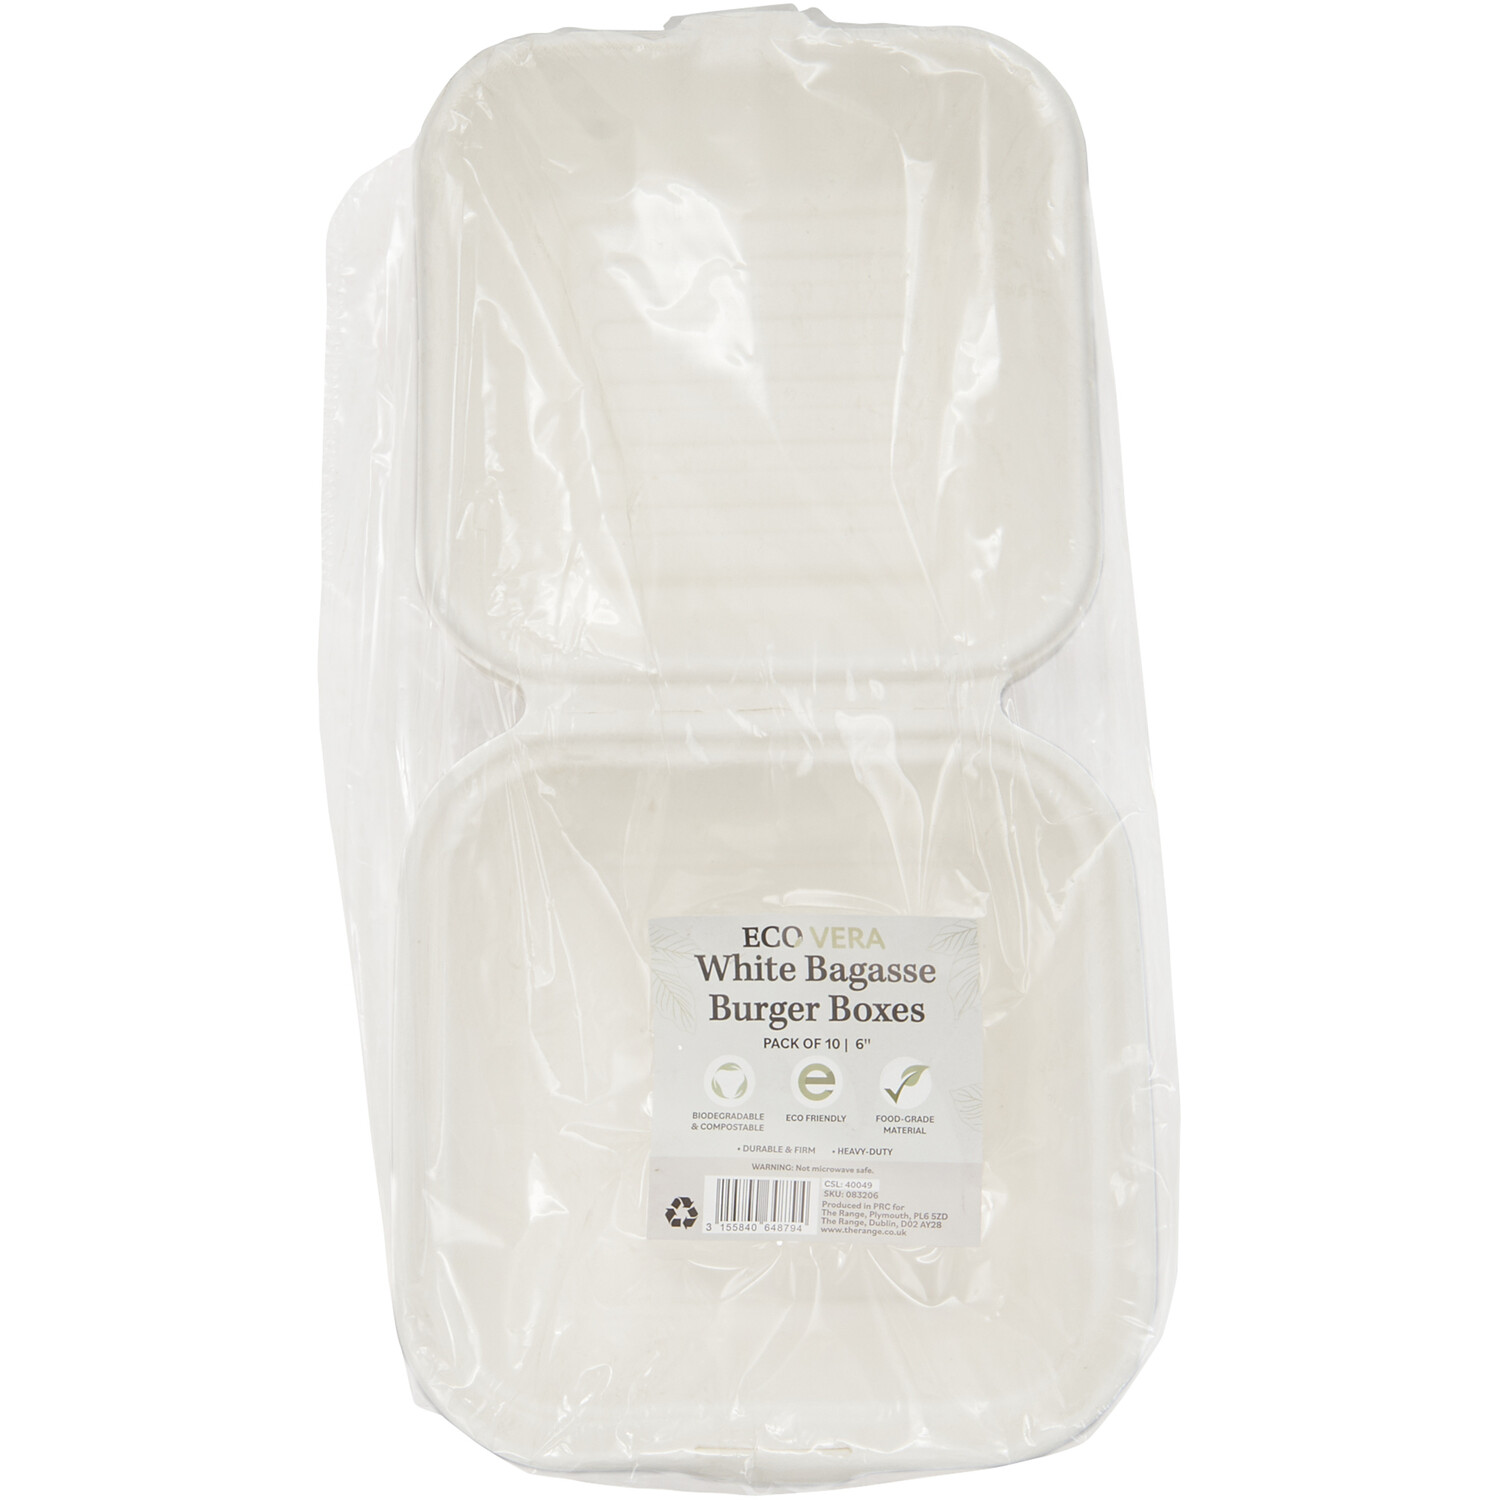 Pack of 10 Bagasse Burger Boxes - White Image 1